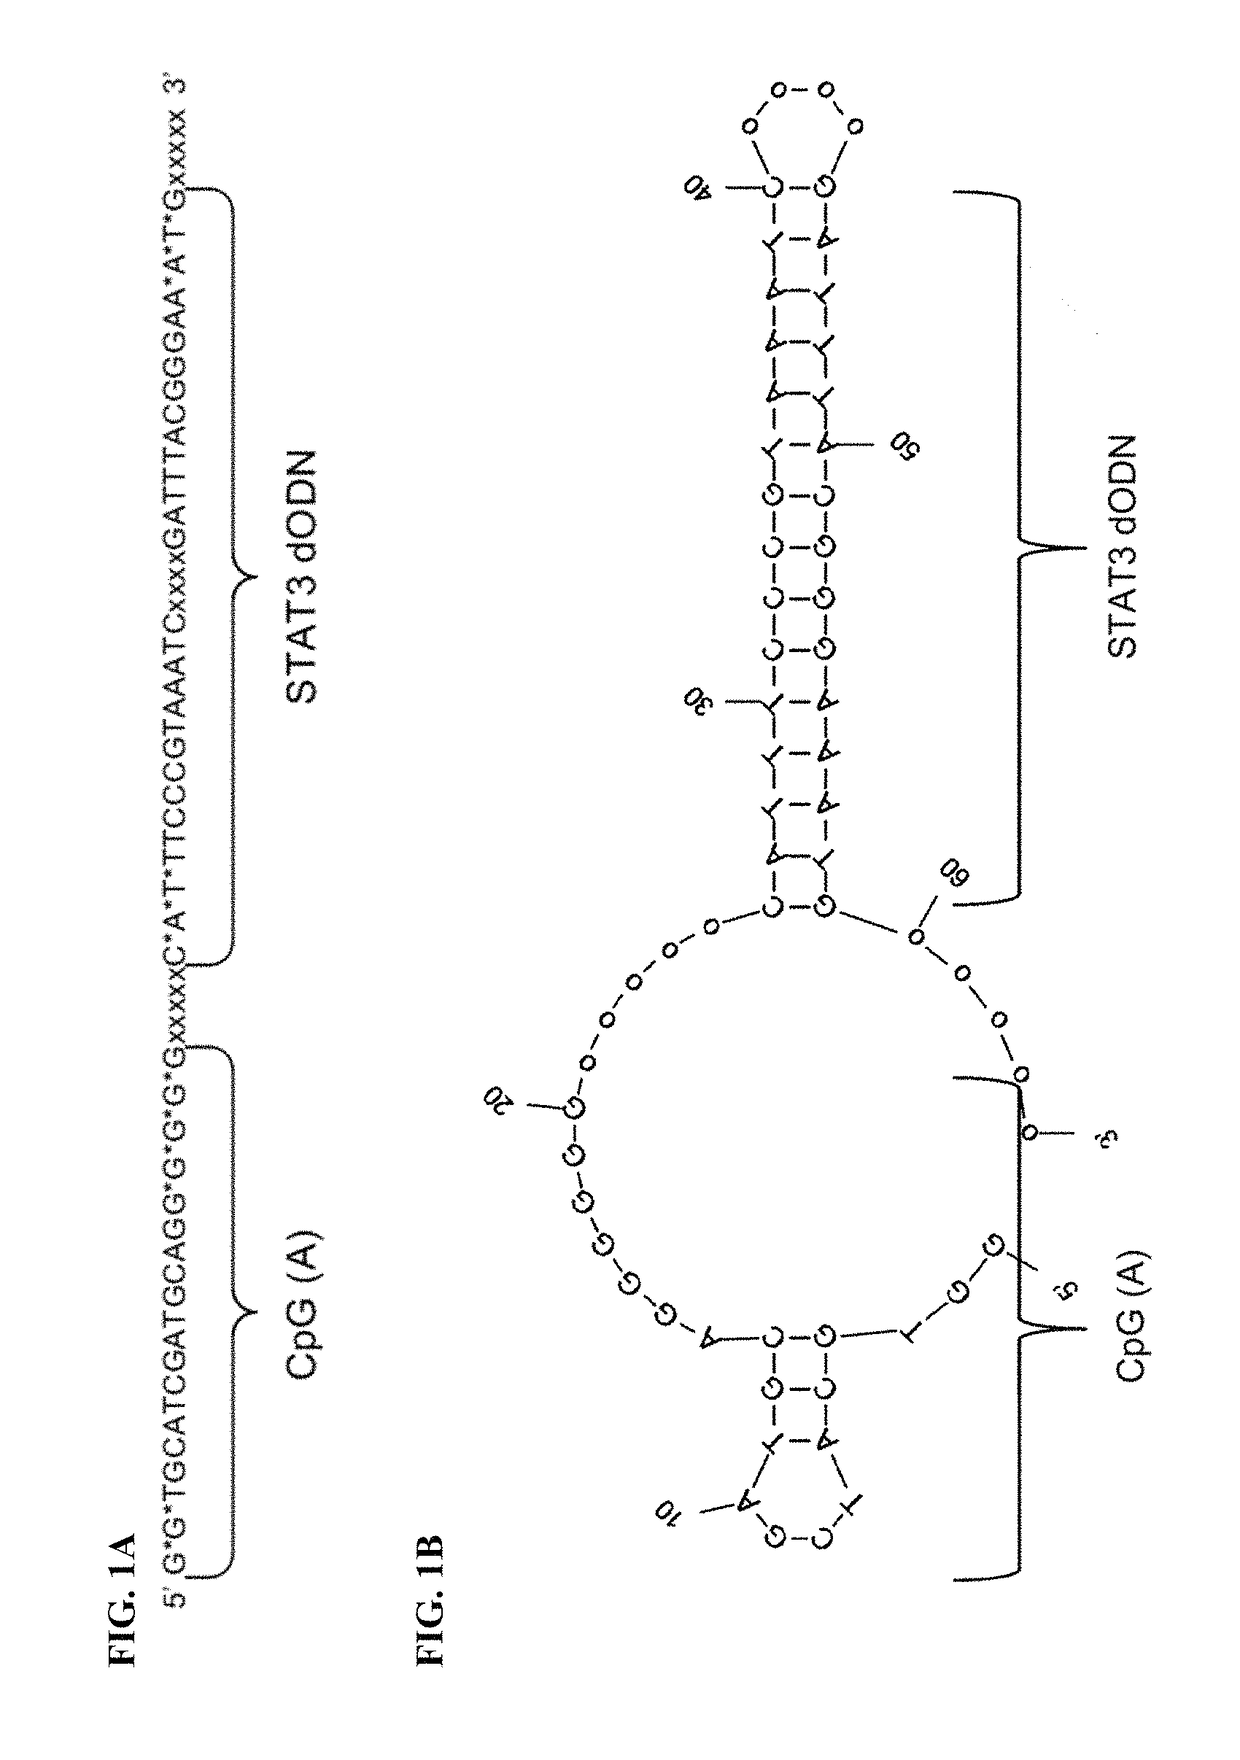 STAT3 inhibitors and uses thereof